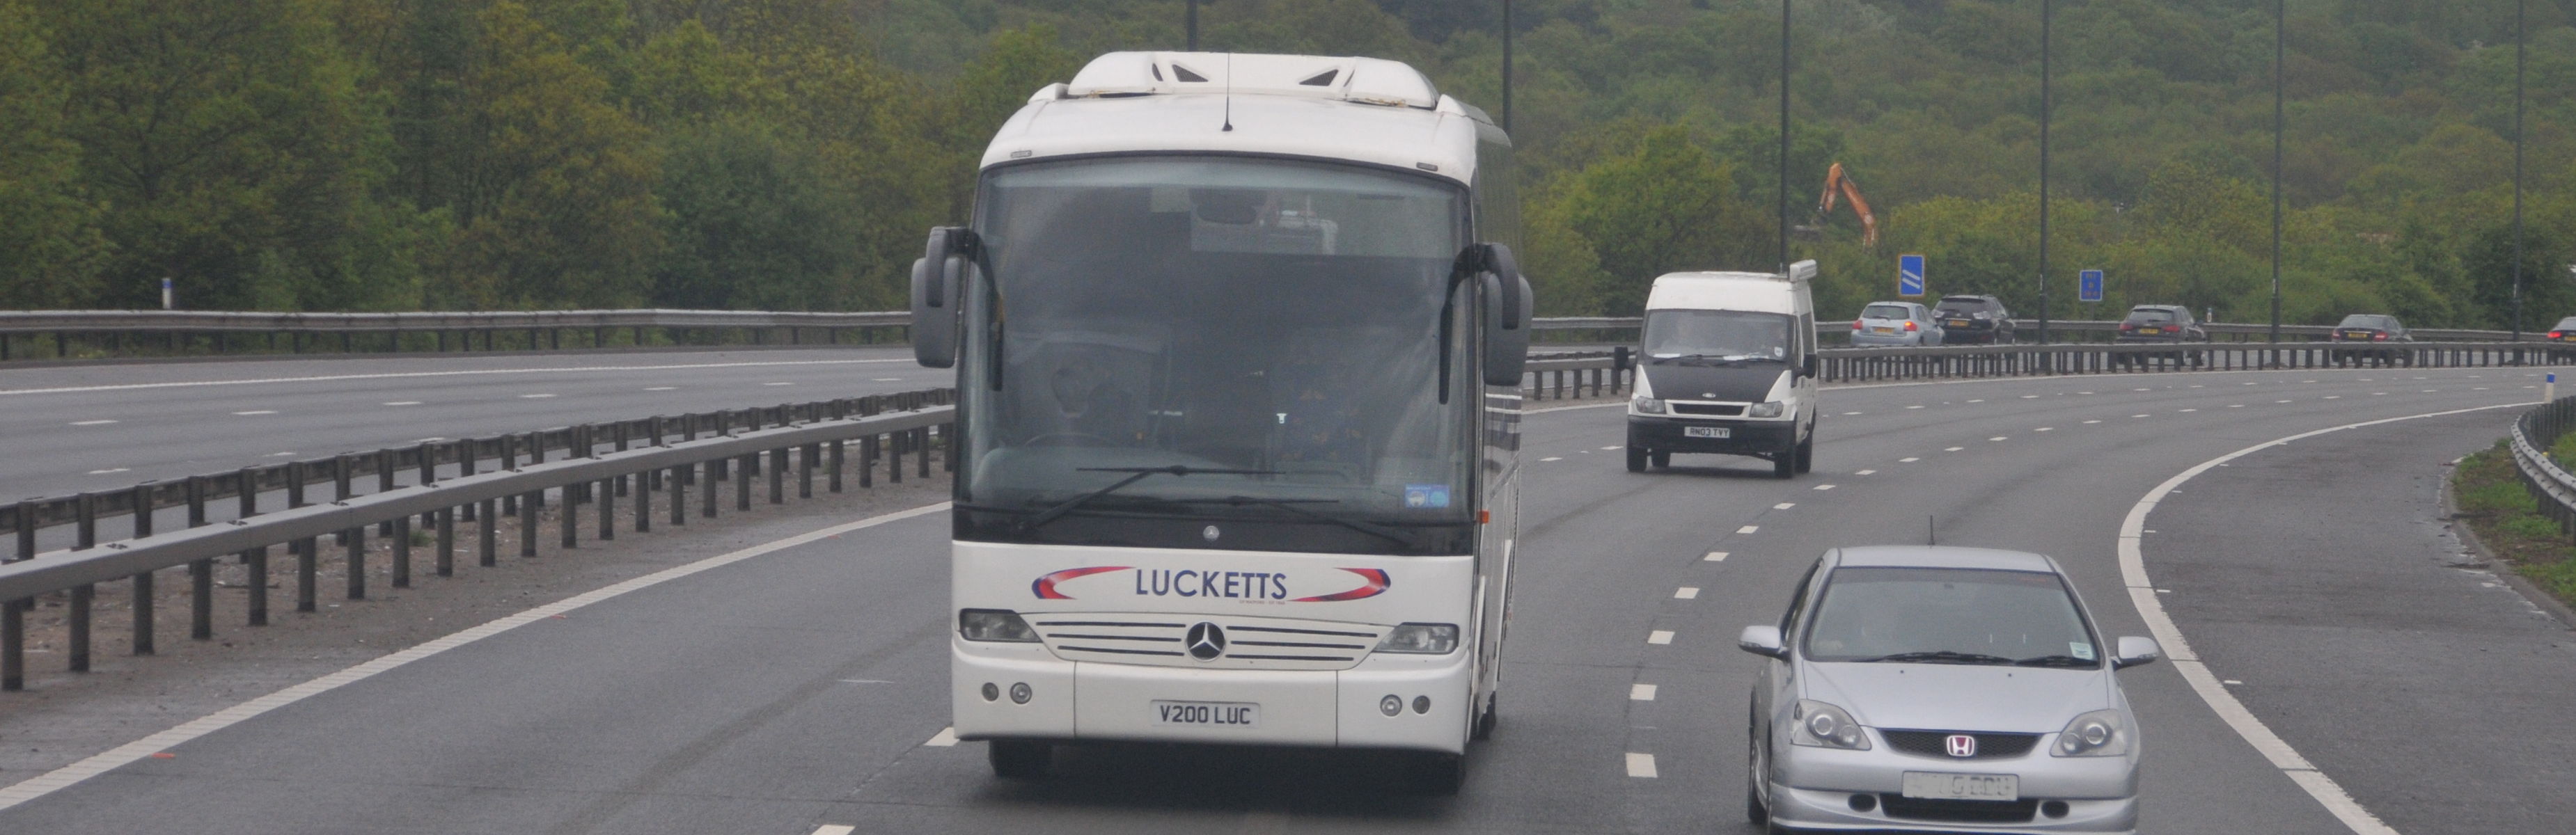 Lucketts of Watford- Hire Coach, Bus, Minibus, School Bus & MORE!